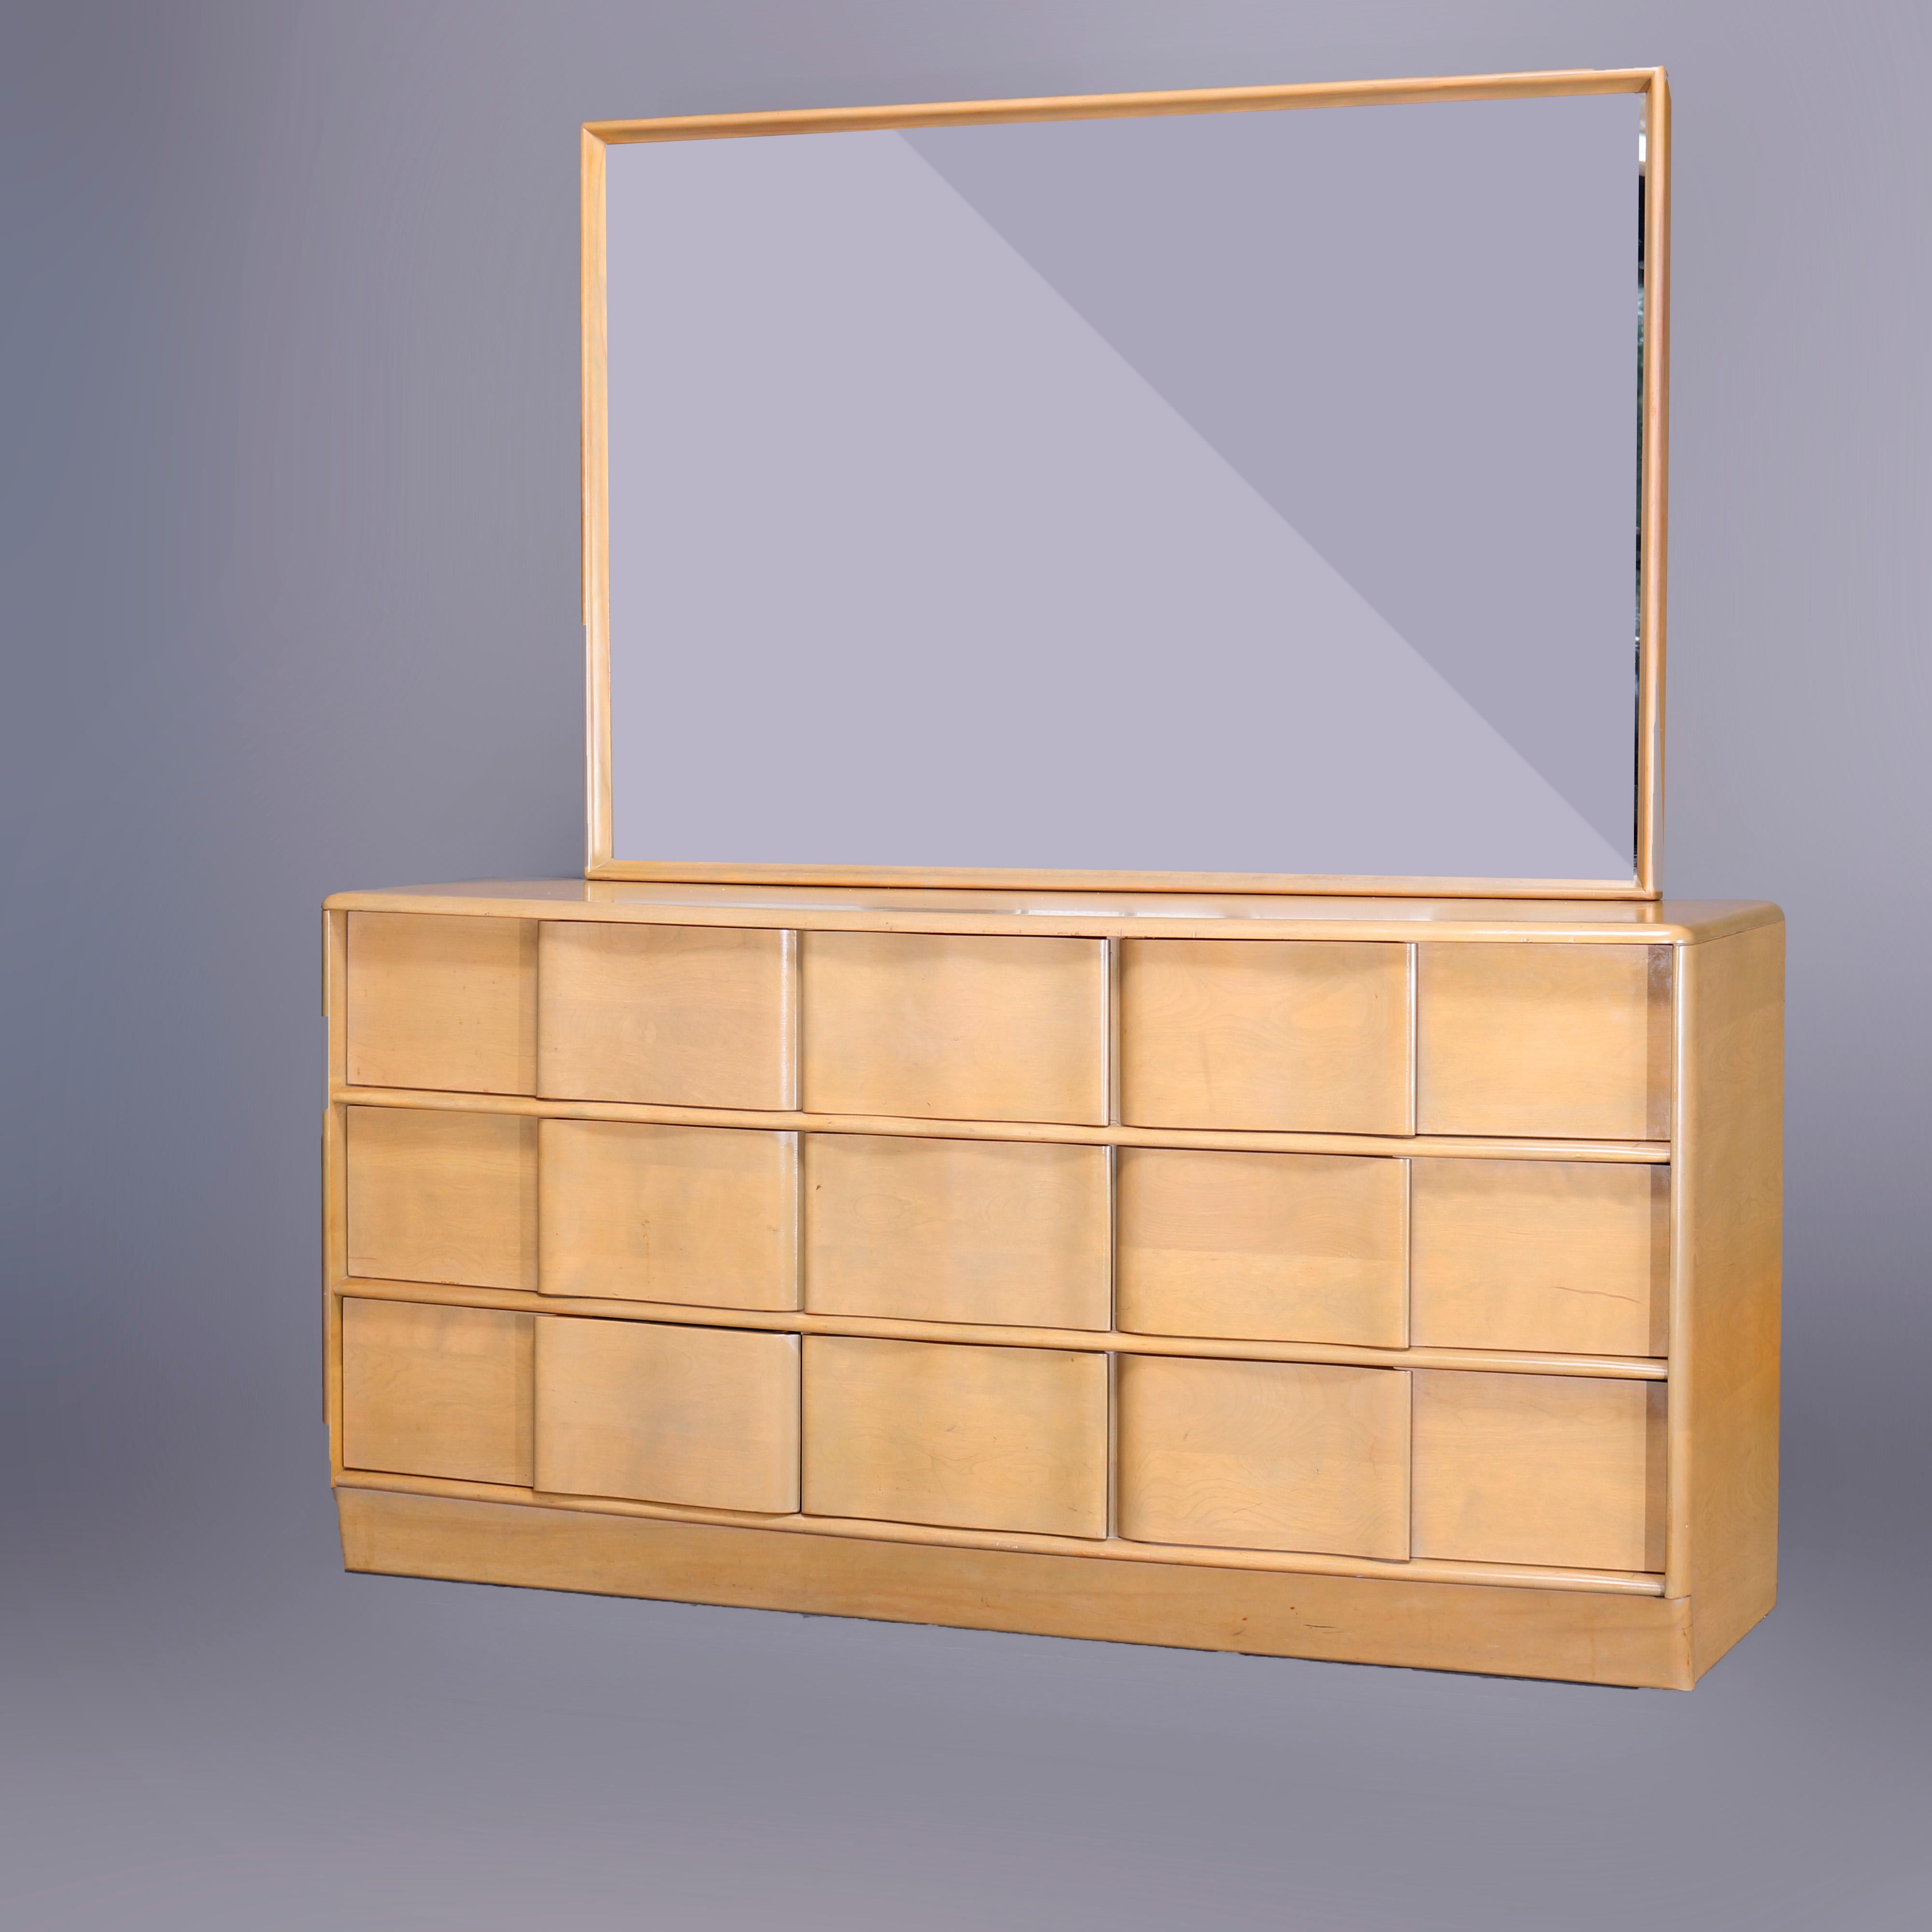 A Mid-Century Modern Heywood Wakefield double dresser in the Sculptura pattern offers birch construction with oversized mirror surmounting case having six drawers, Platinum finish, maker mark in drawer as photographed, c1950

Measures - 66.25'' H